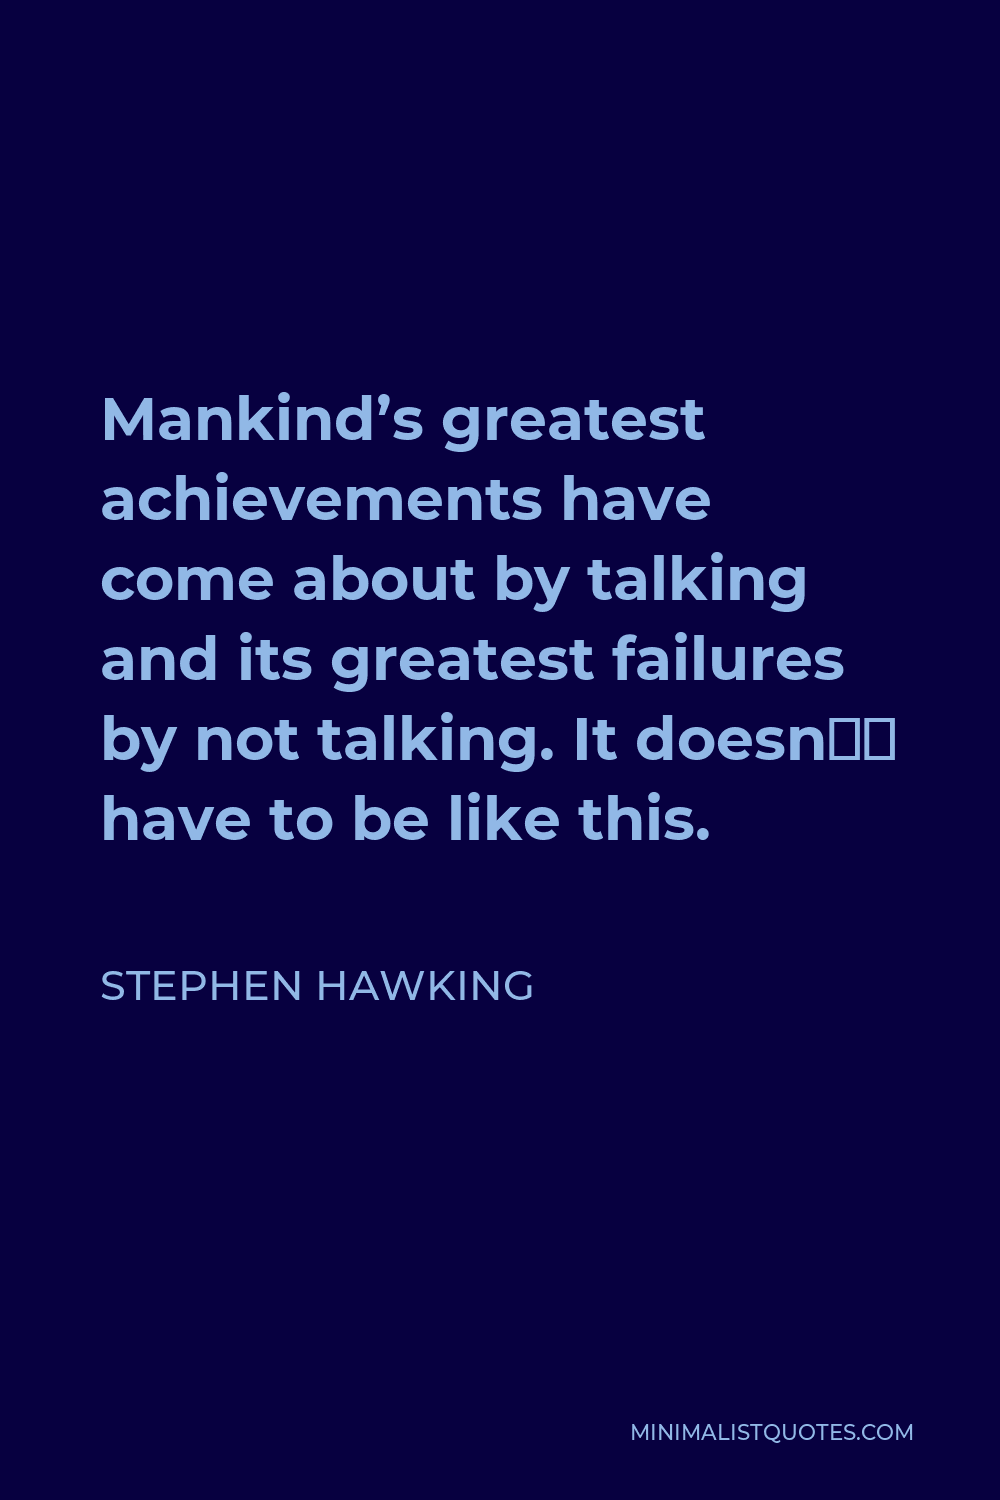 Stephen Hawking Quote - Mankind’s greatest achievements have come about by talking and its greatest failures by not talking. It doesn’t have to be like this.